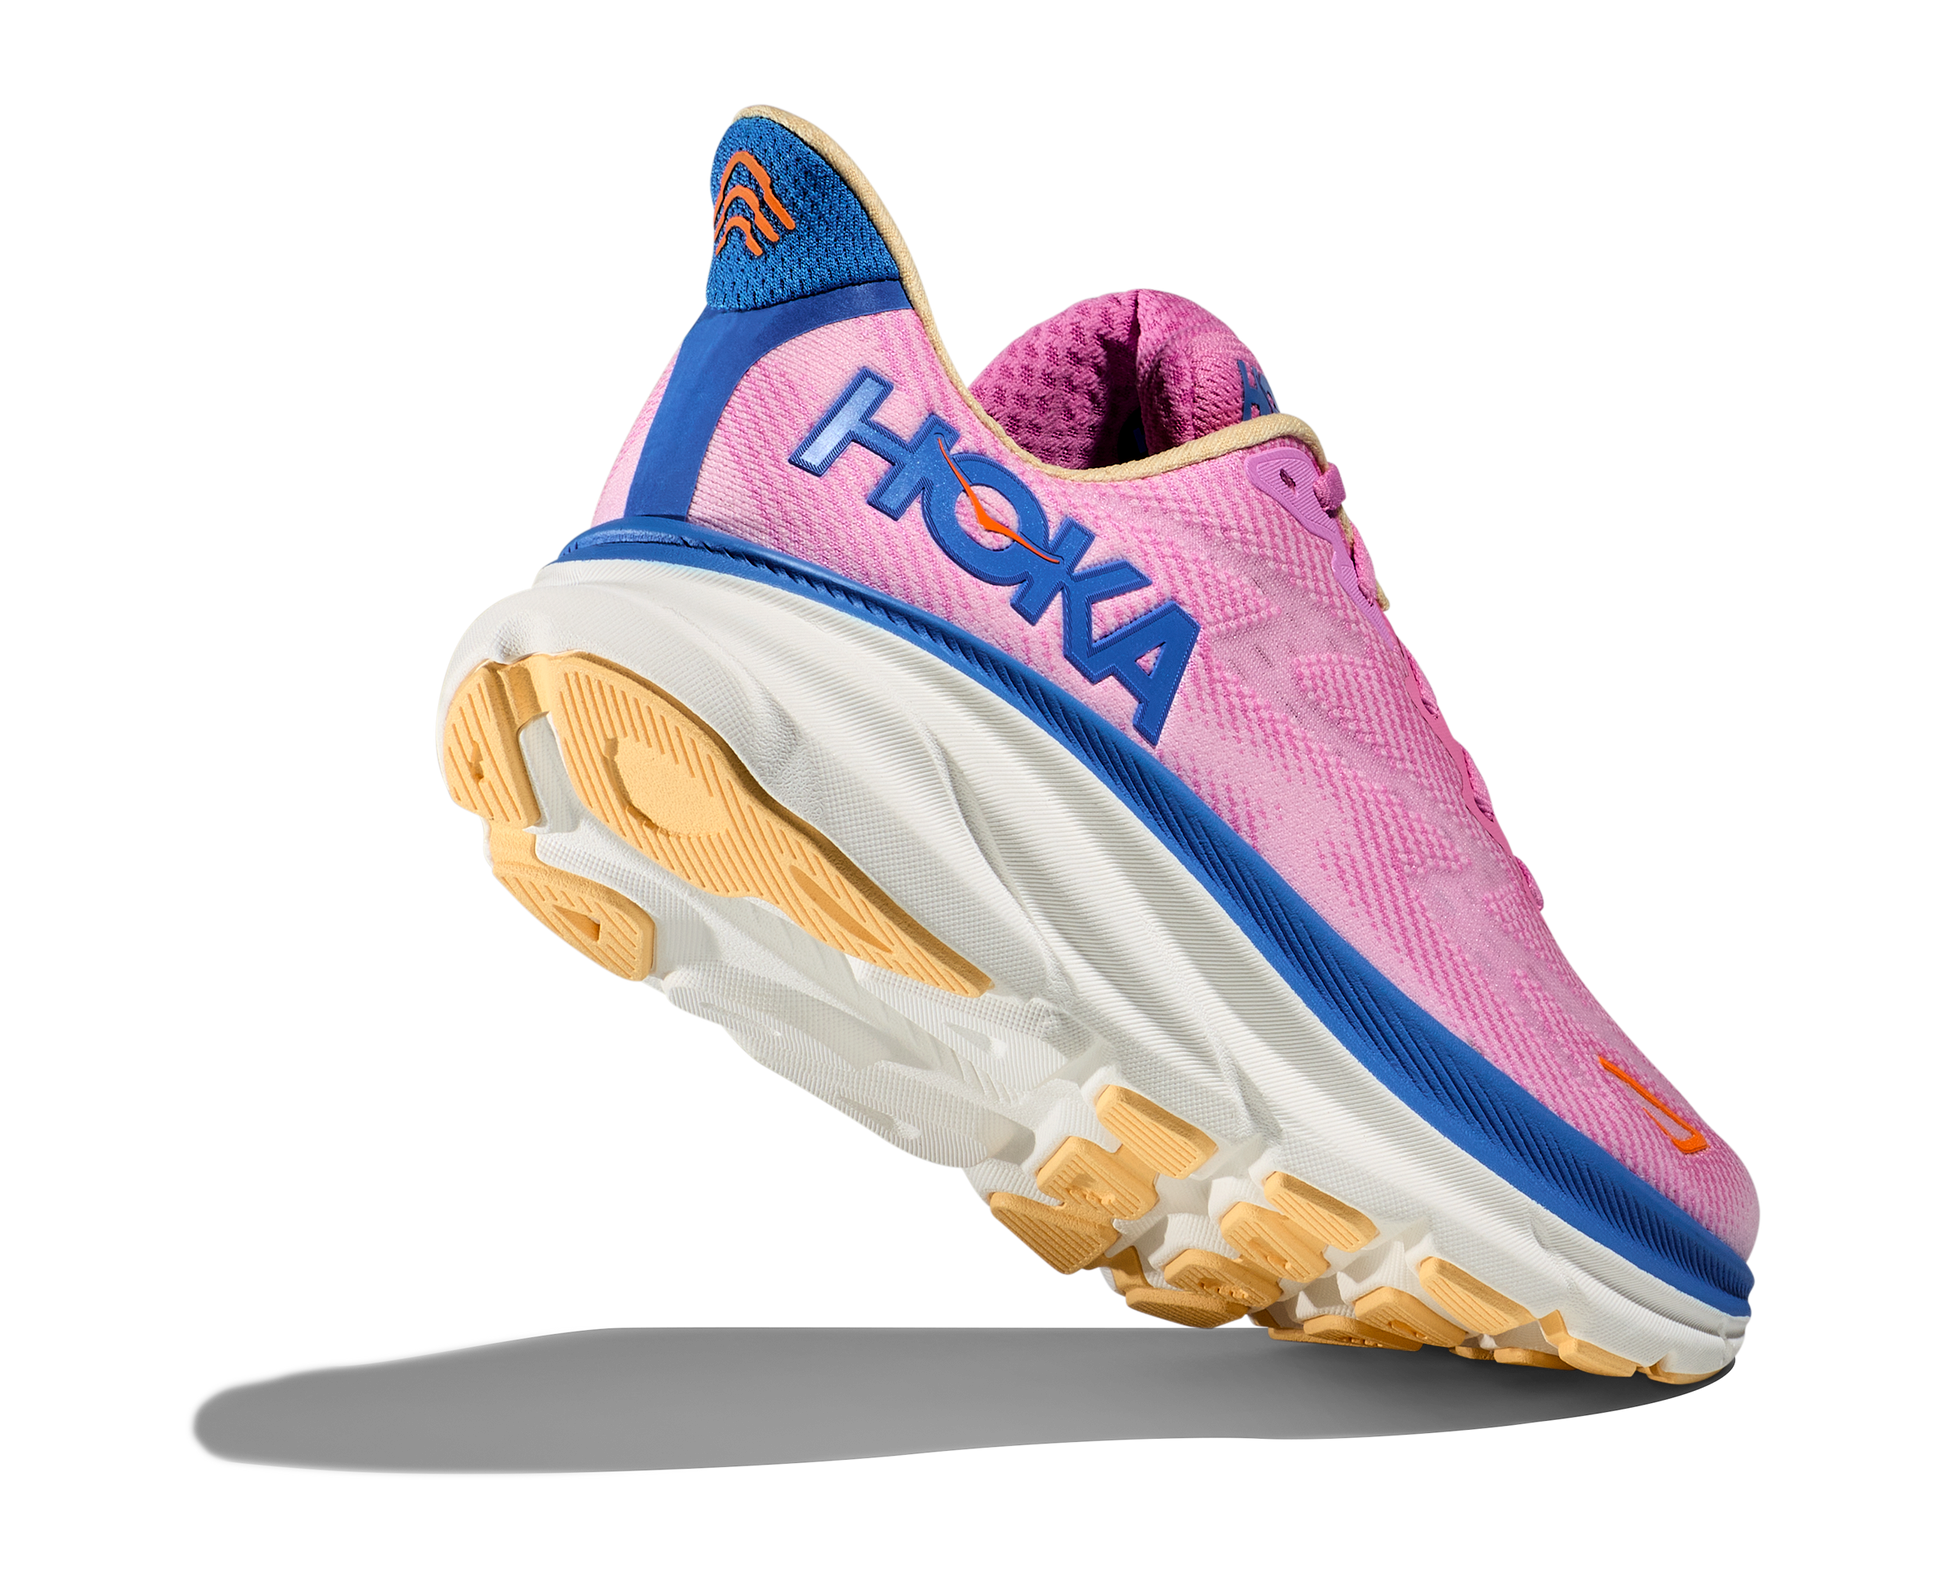 Hoka running shoe for Women. Clifton 9 is pink with blue details.